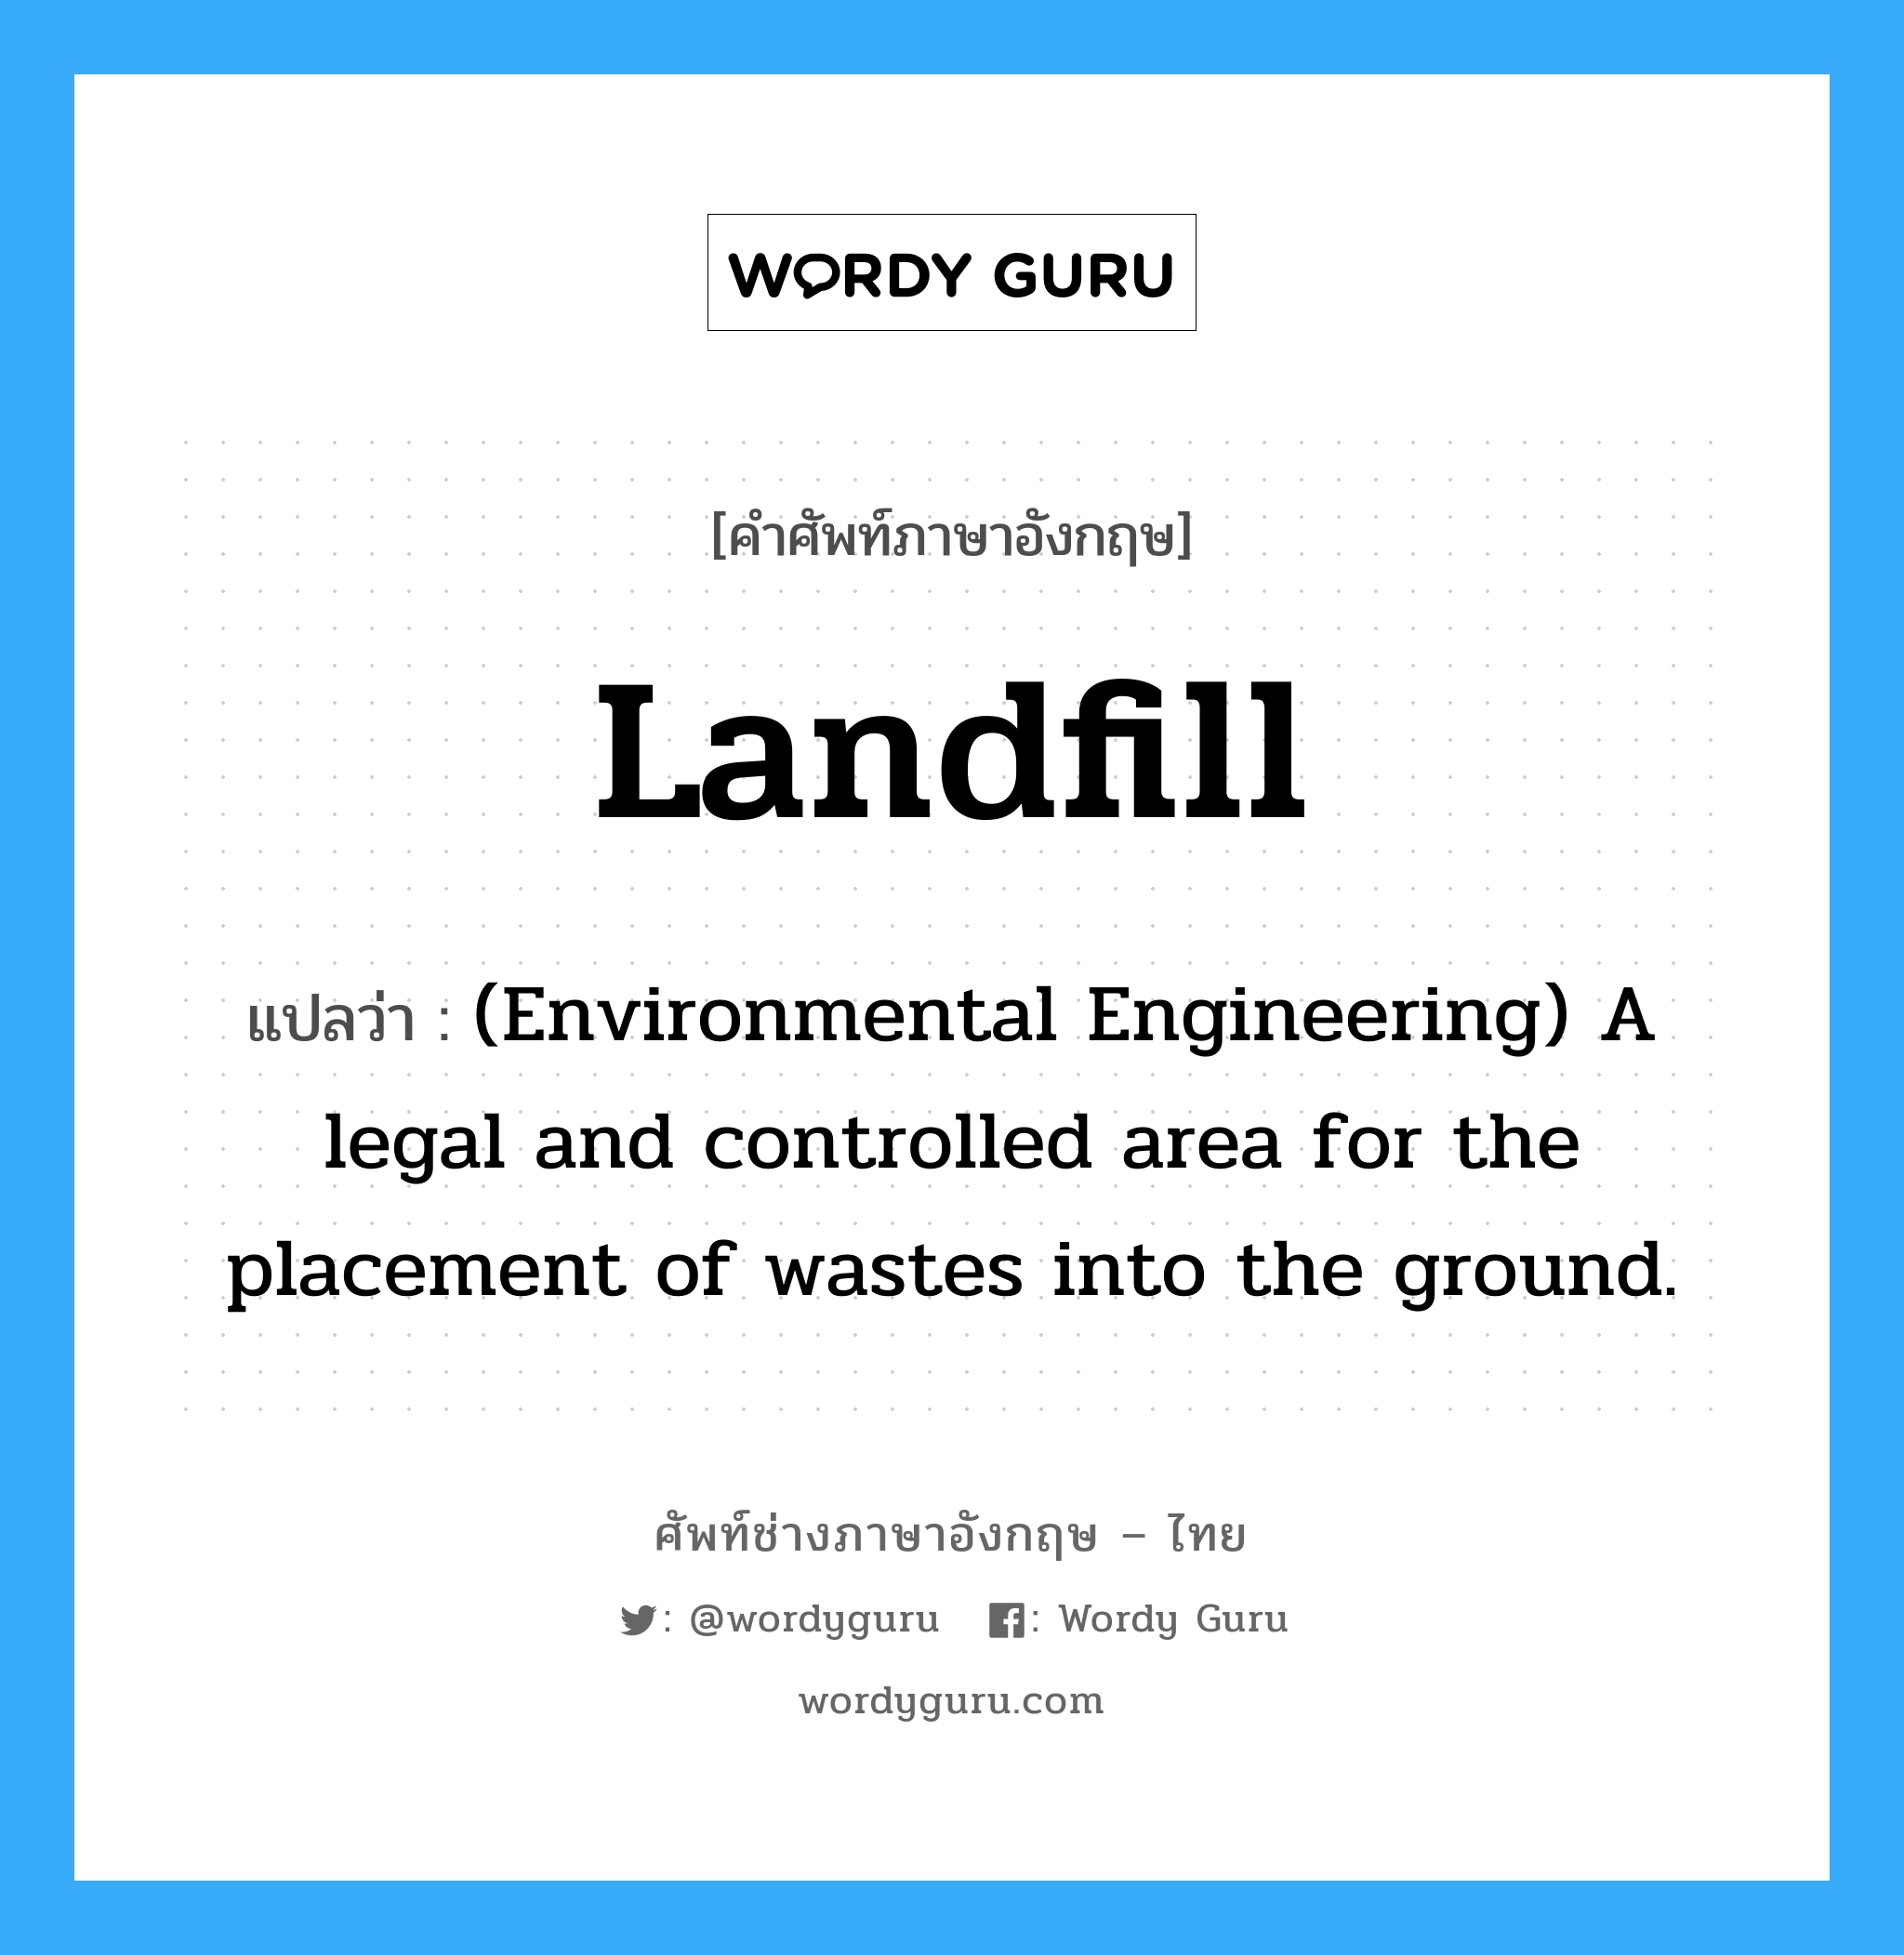 Landfill แปลว่า?, คำศัพท์ช่างภาษาอังกฤษ - ไทย Landfill คำศัพท์ภาษาอังกฤษ Landfill แปลว่า (Environmental Engineering) A legal and controlled area for the placement of wastes into the ground.